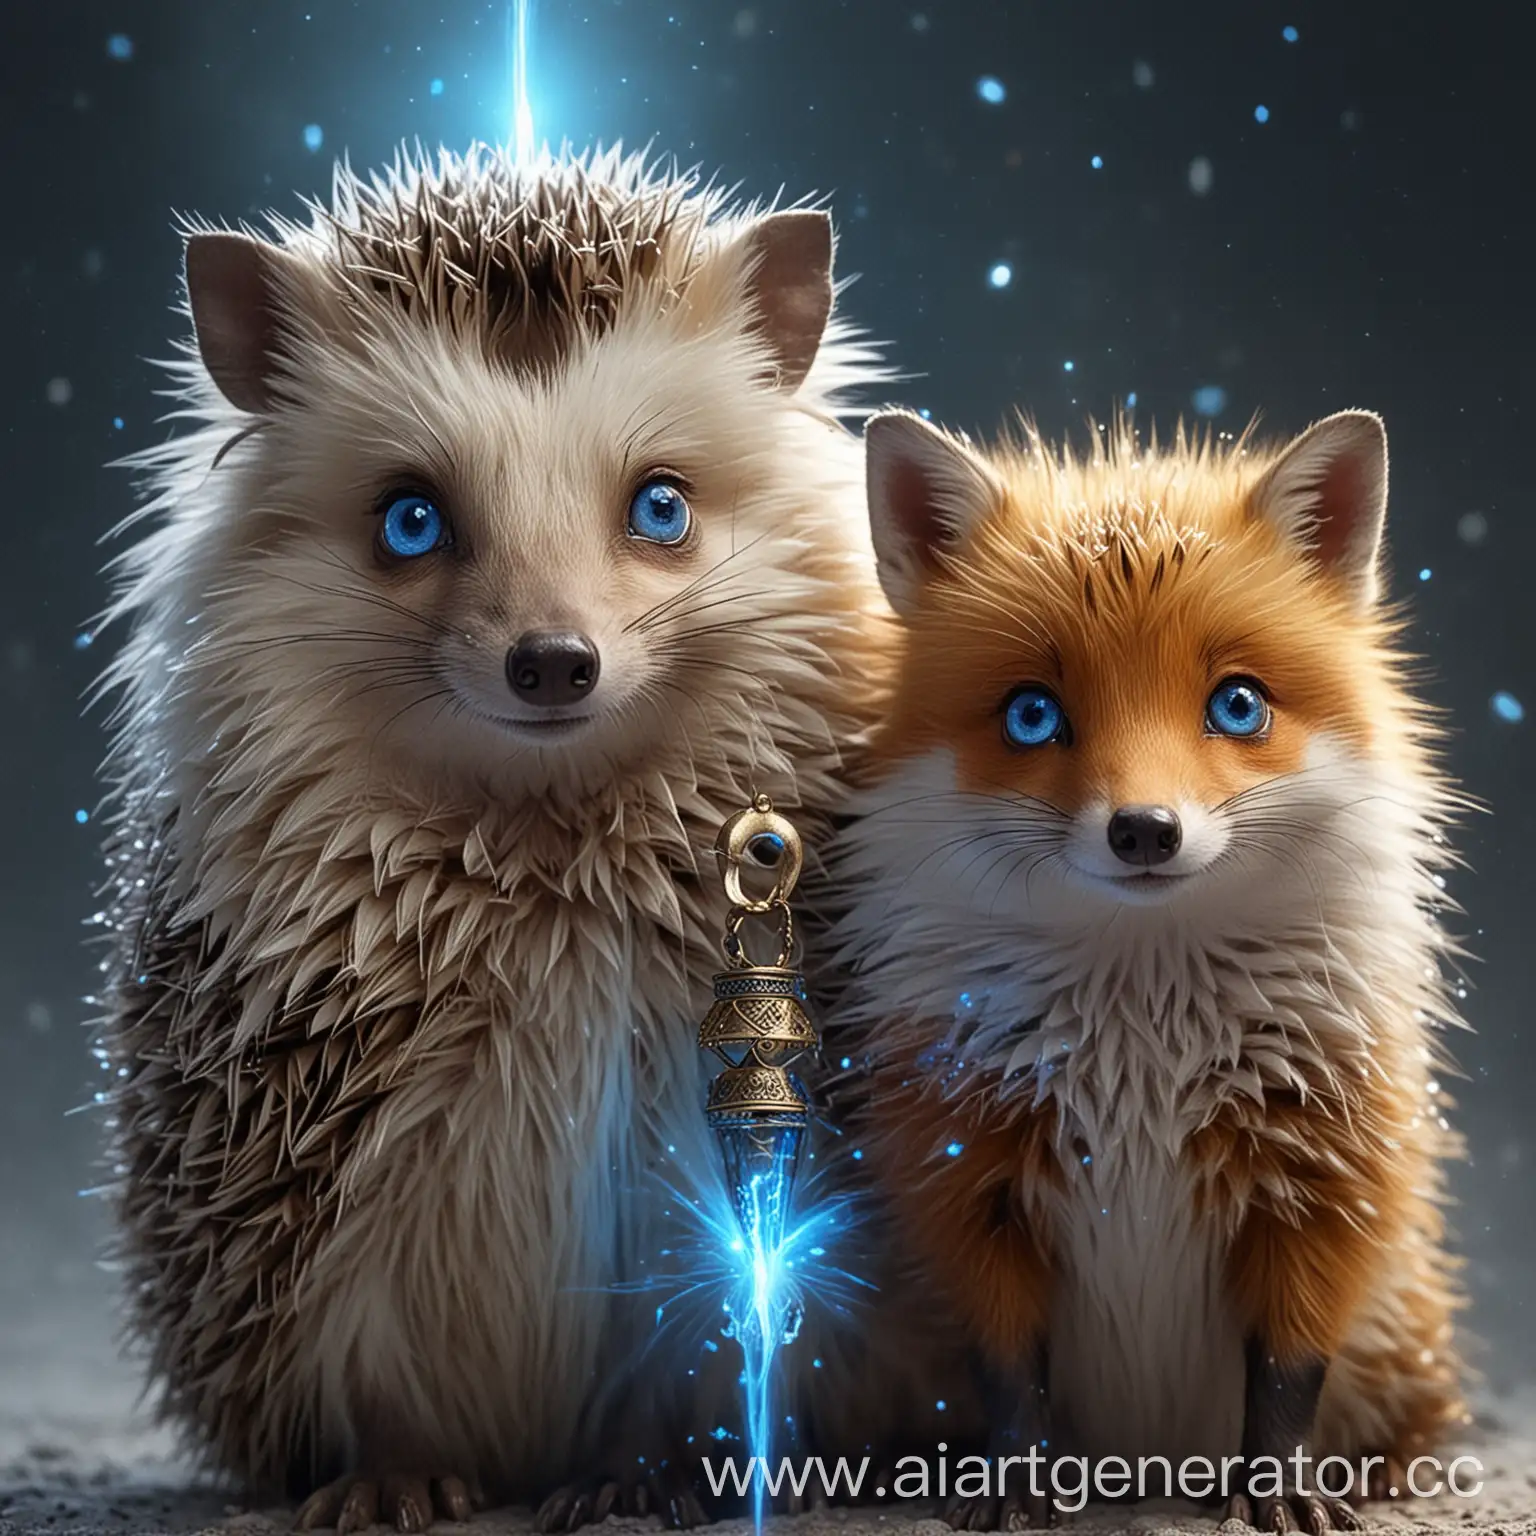 Enlightened-Hedgehog-and-Fox-with-Blue-Eyes-in-Mystical-Forest